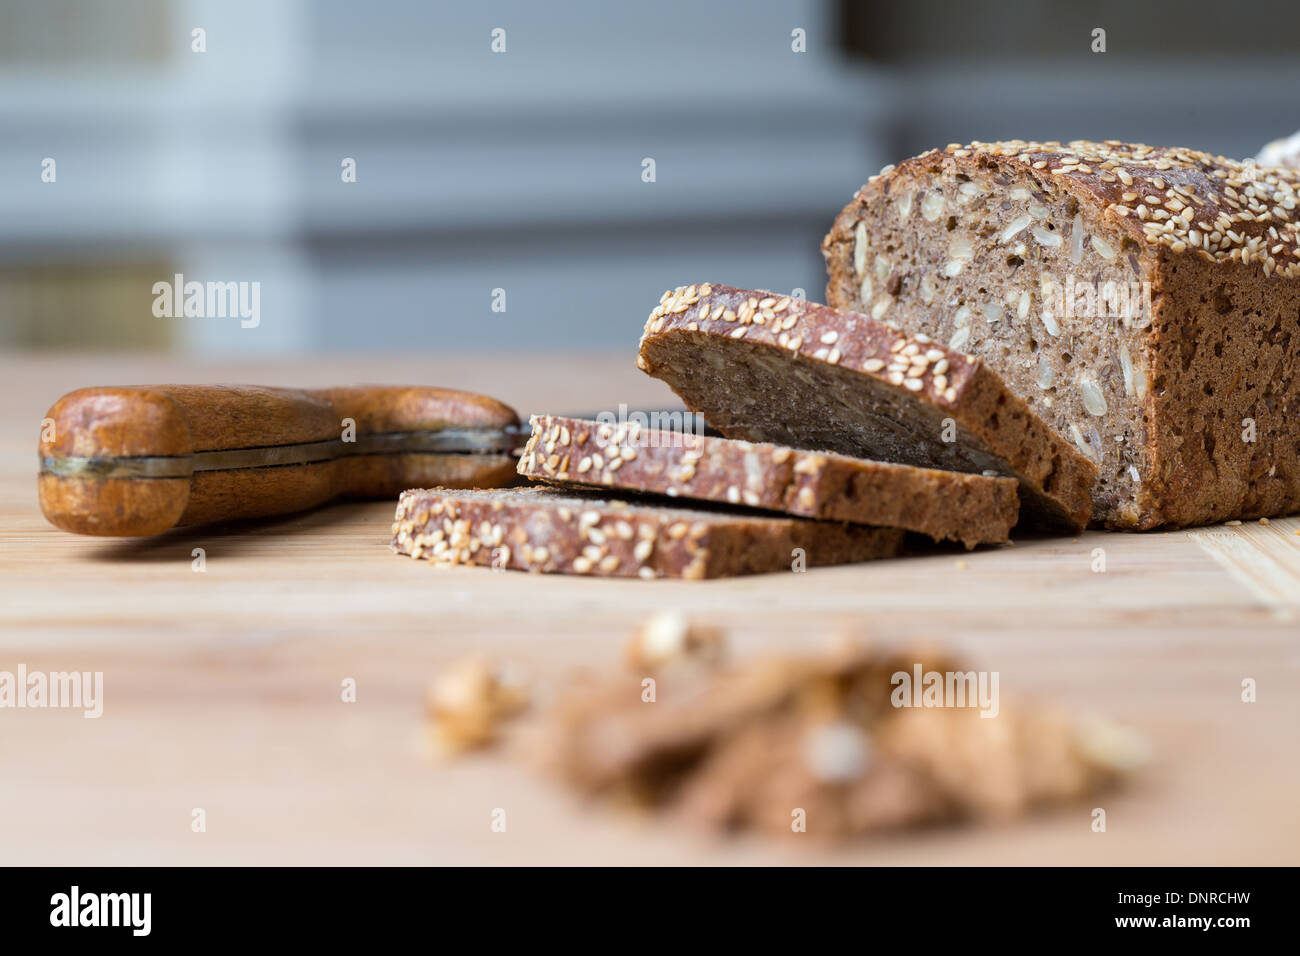 Sliced loaf of wheat bread with sunflower seeds Stock Photo